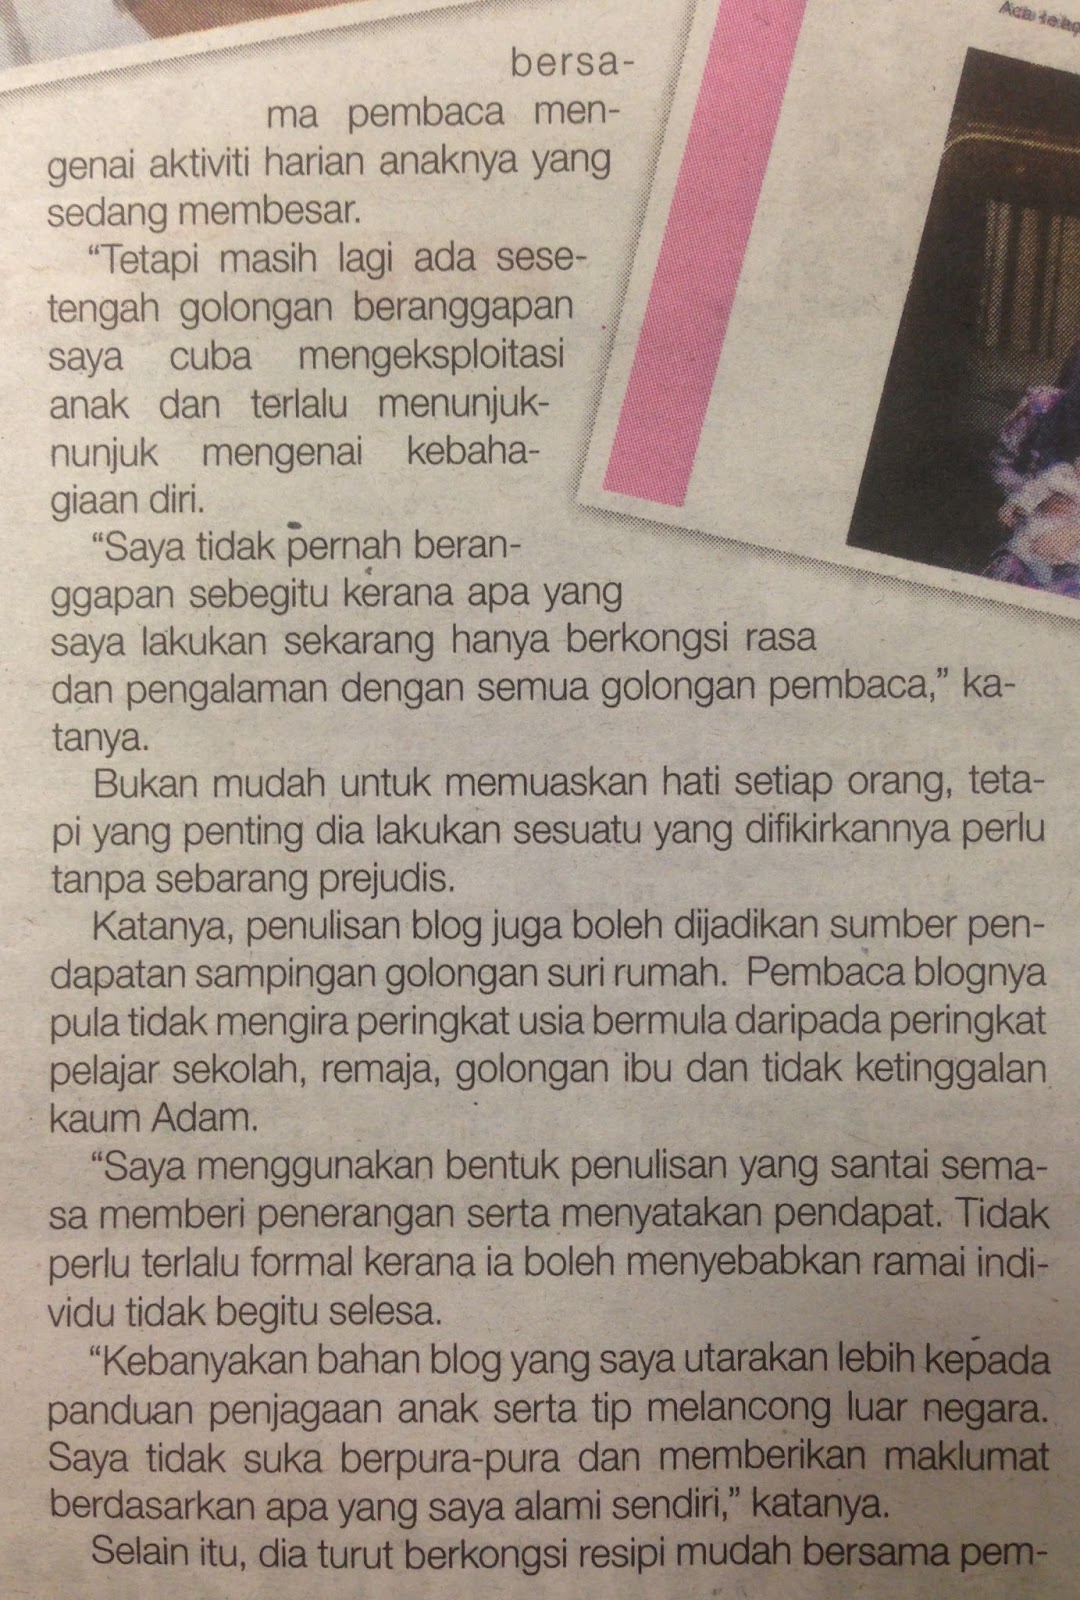 The Kasihs: FEATURED IN HARIAN METRO